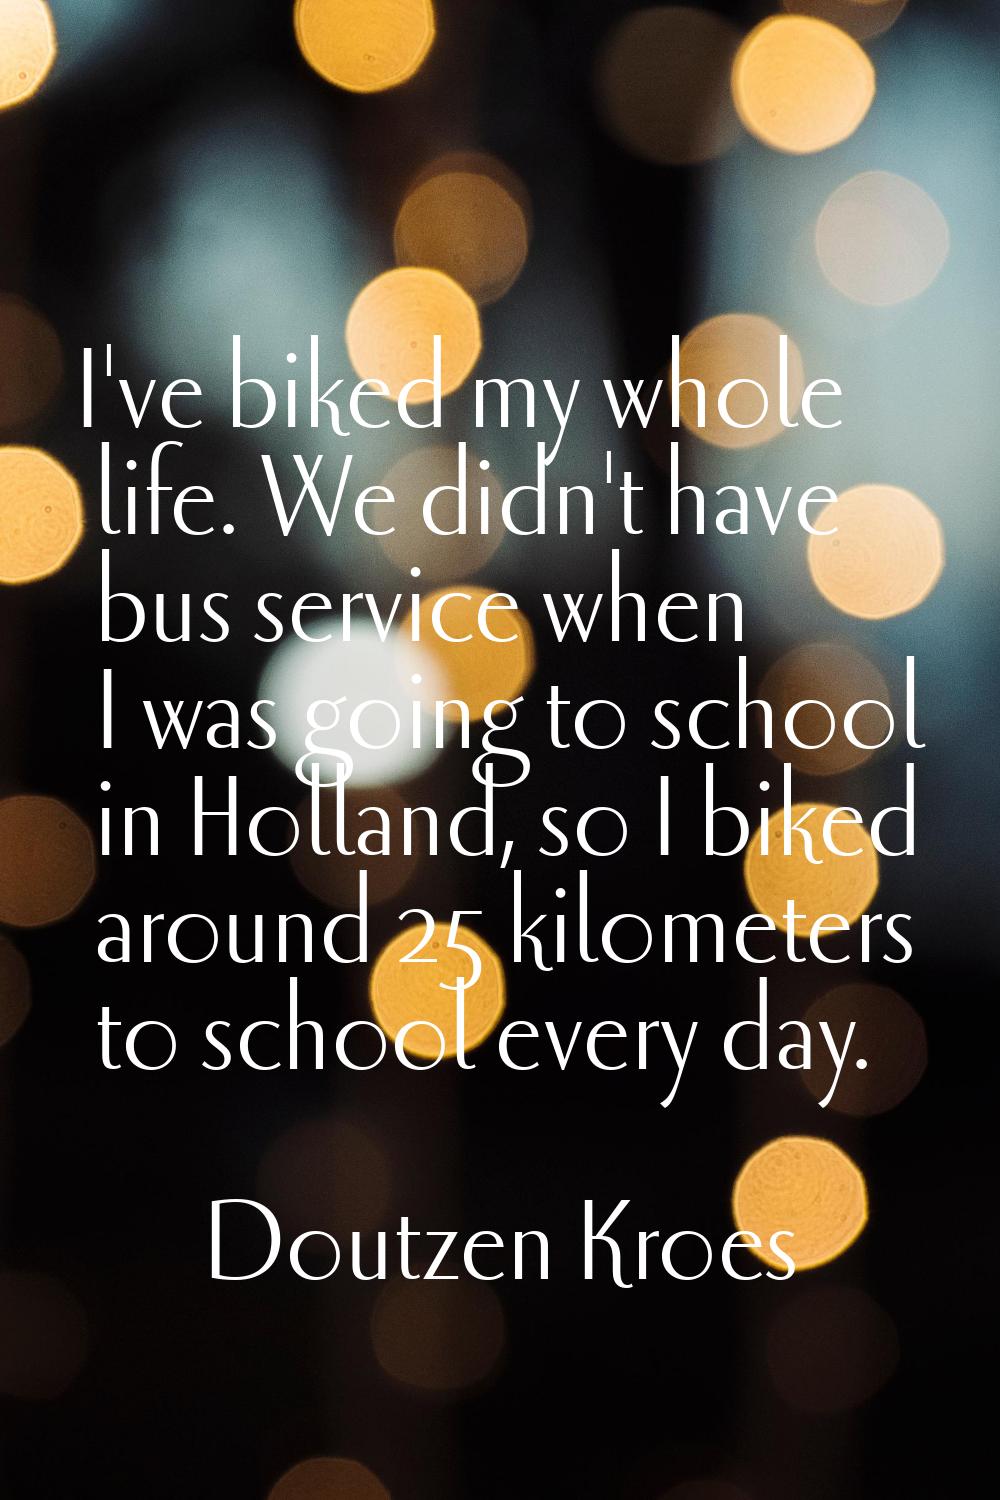 I've biked my whole life. We didn't have bus service when I was going to school in Holland, so I bi